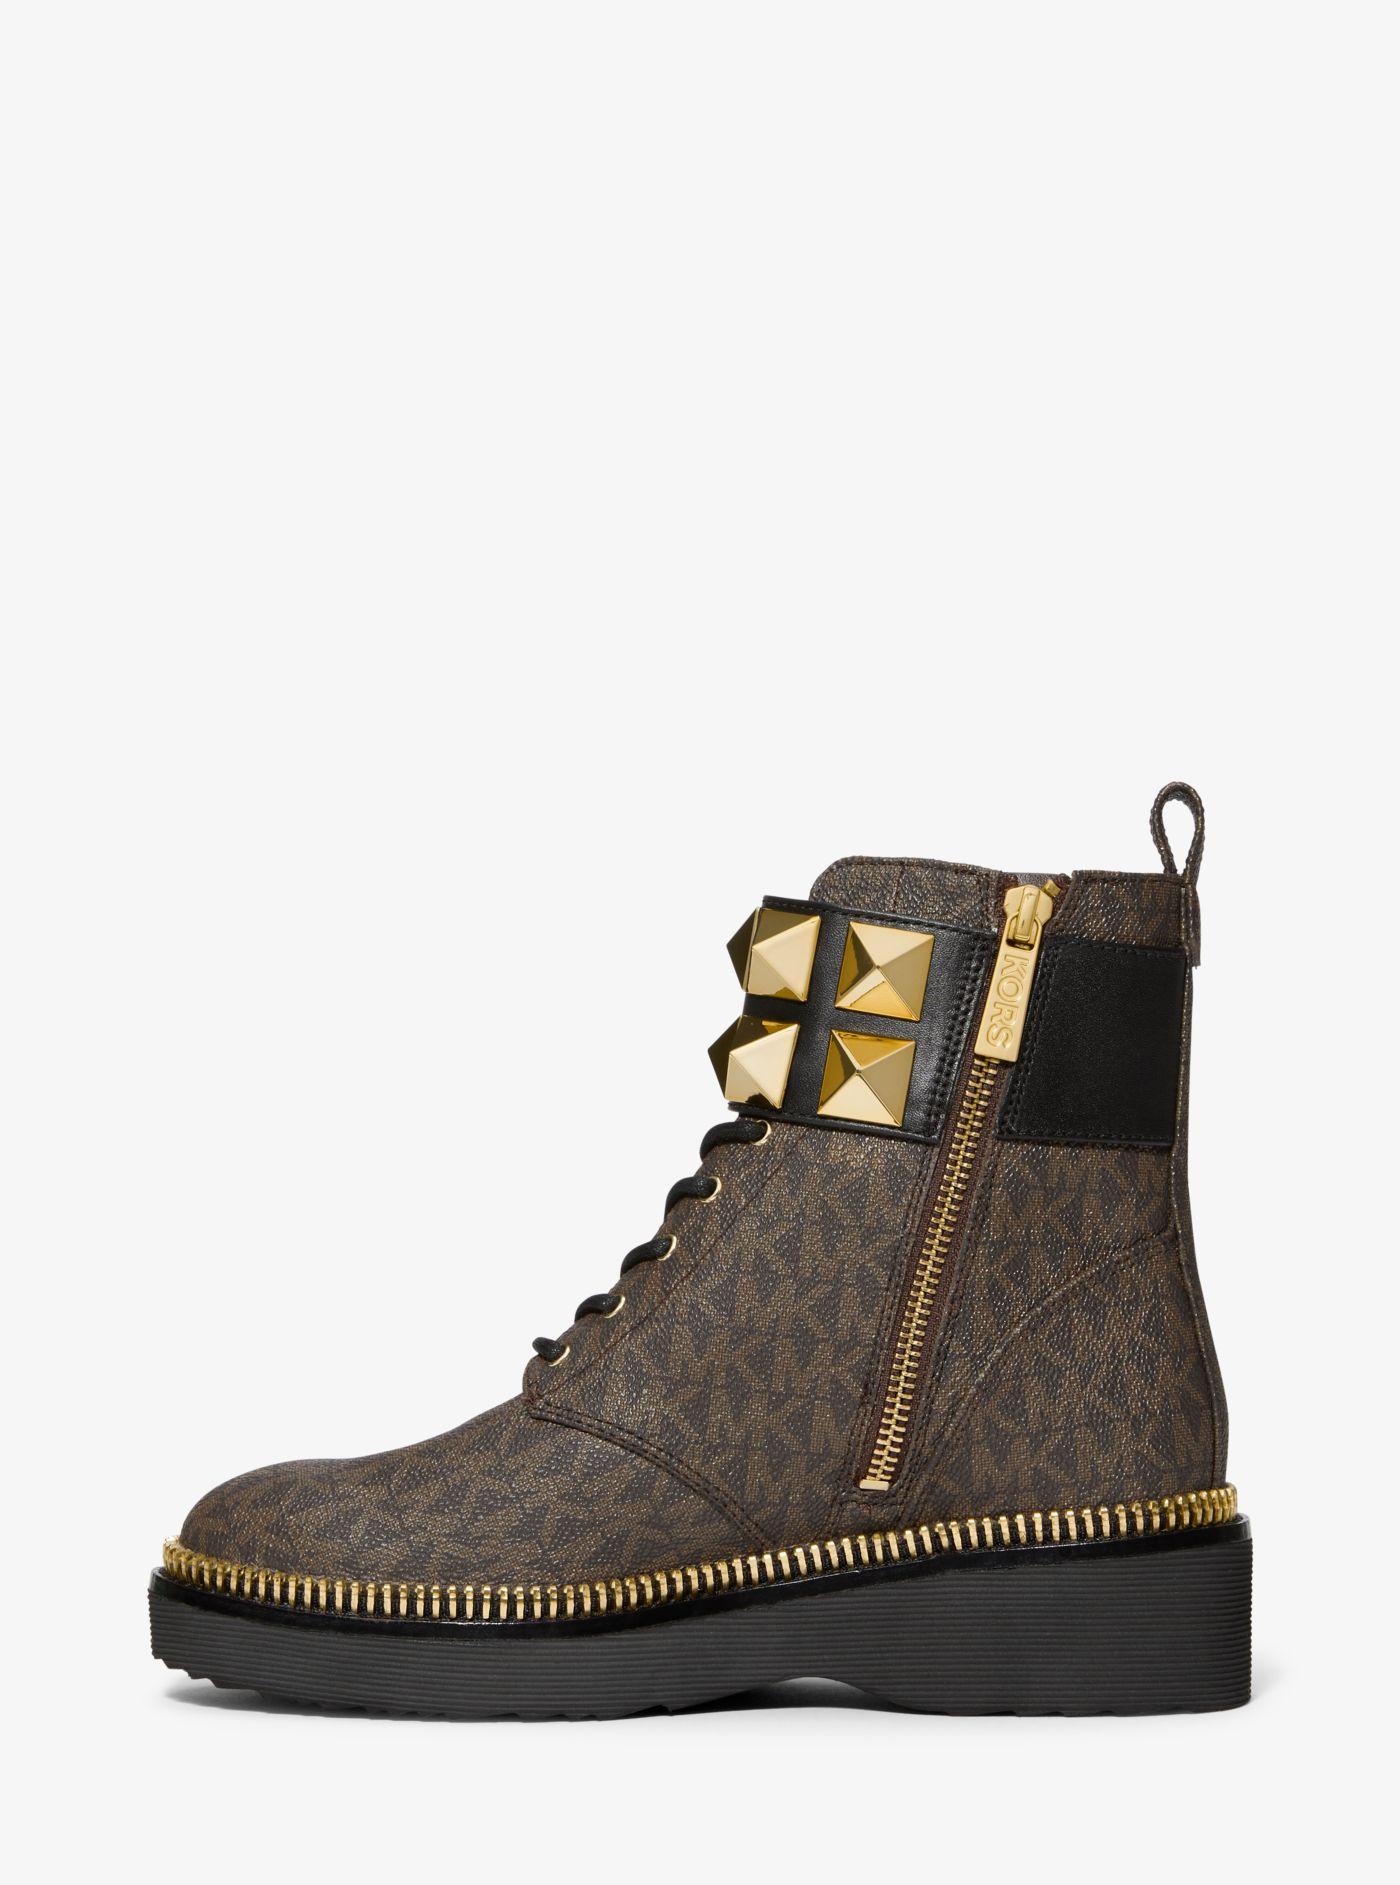 Michael Kors Haskell Studded Leather And Logo Combat Boot in Brown | Lyst